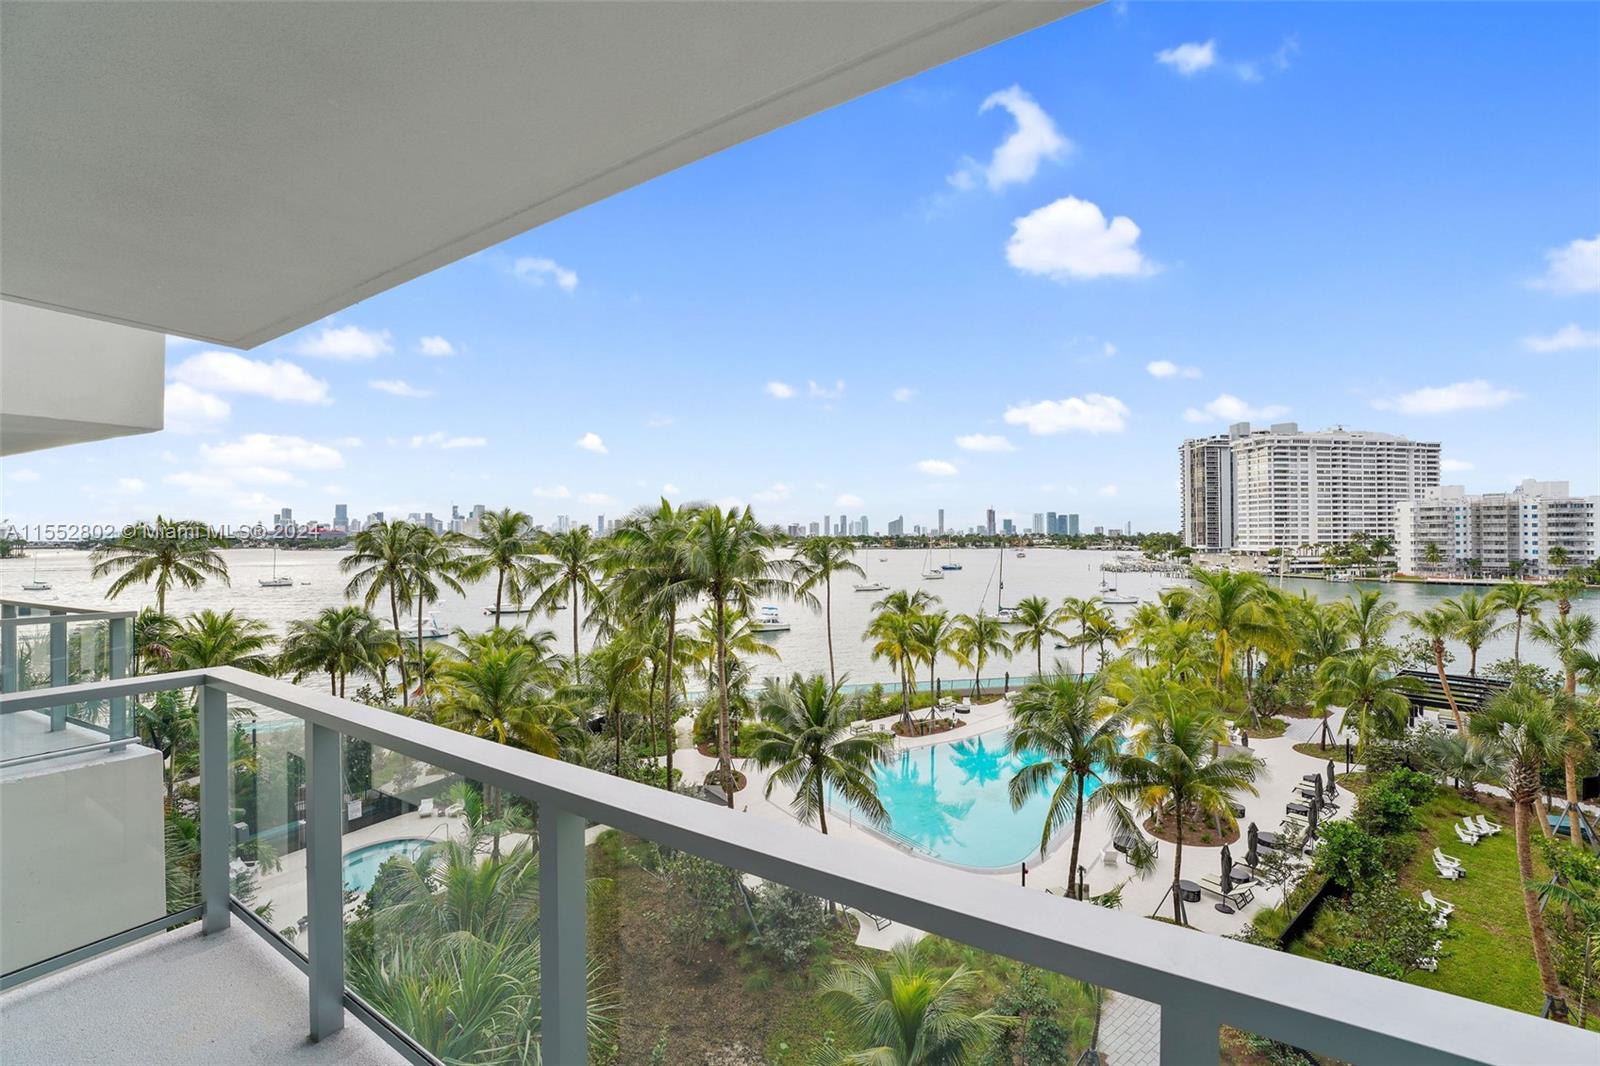 AVAILABLE 04/23. Photos may be from the exact unit on the same line but on another floor. Welcome to Flamingo Point Miami Beach's most exciting rental community. This unit features hardwood floors, modern kitchen & baths w/SS appliances & granite counter tops. Amenities include fitness center, two resort style pools with private cabanas, BBQ area and much more. Move in costs are 1st month + $1500 deposit. Parking cost 1st vchl. $187 p/m. *FAST APPROVAL! (NOTE: Rental rates are subject to change depending on move-in date and lease term. Advertised rate is best rate and maybe on leases longer than 12 months. Income must be greater than 3x one month's rent and minimum credit score of 620 in order to be approved).